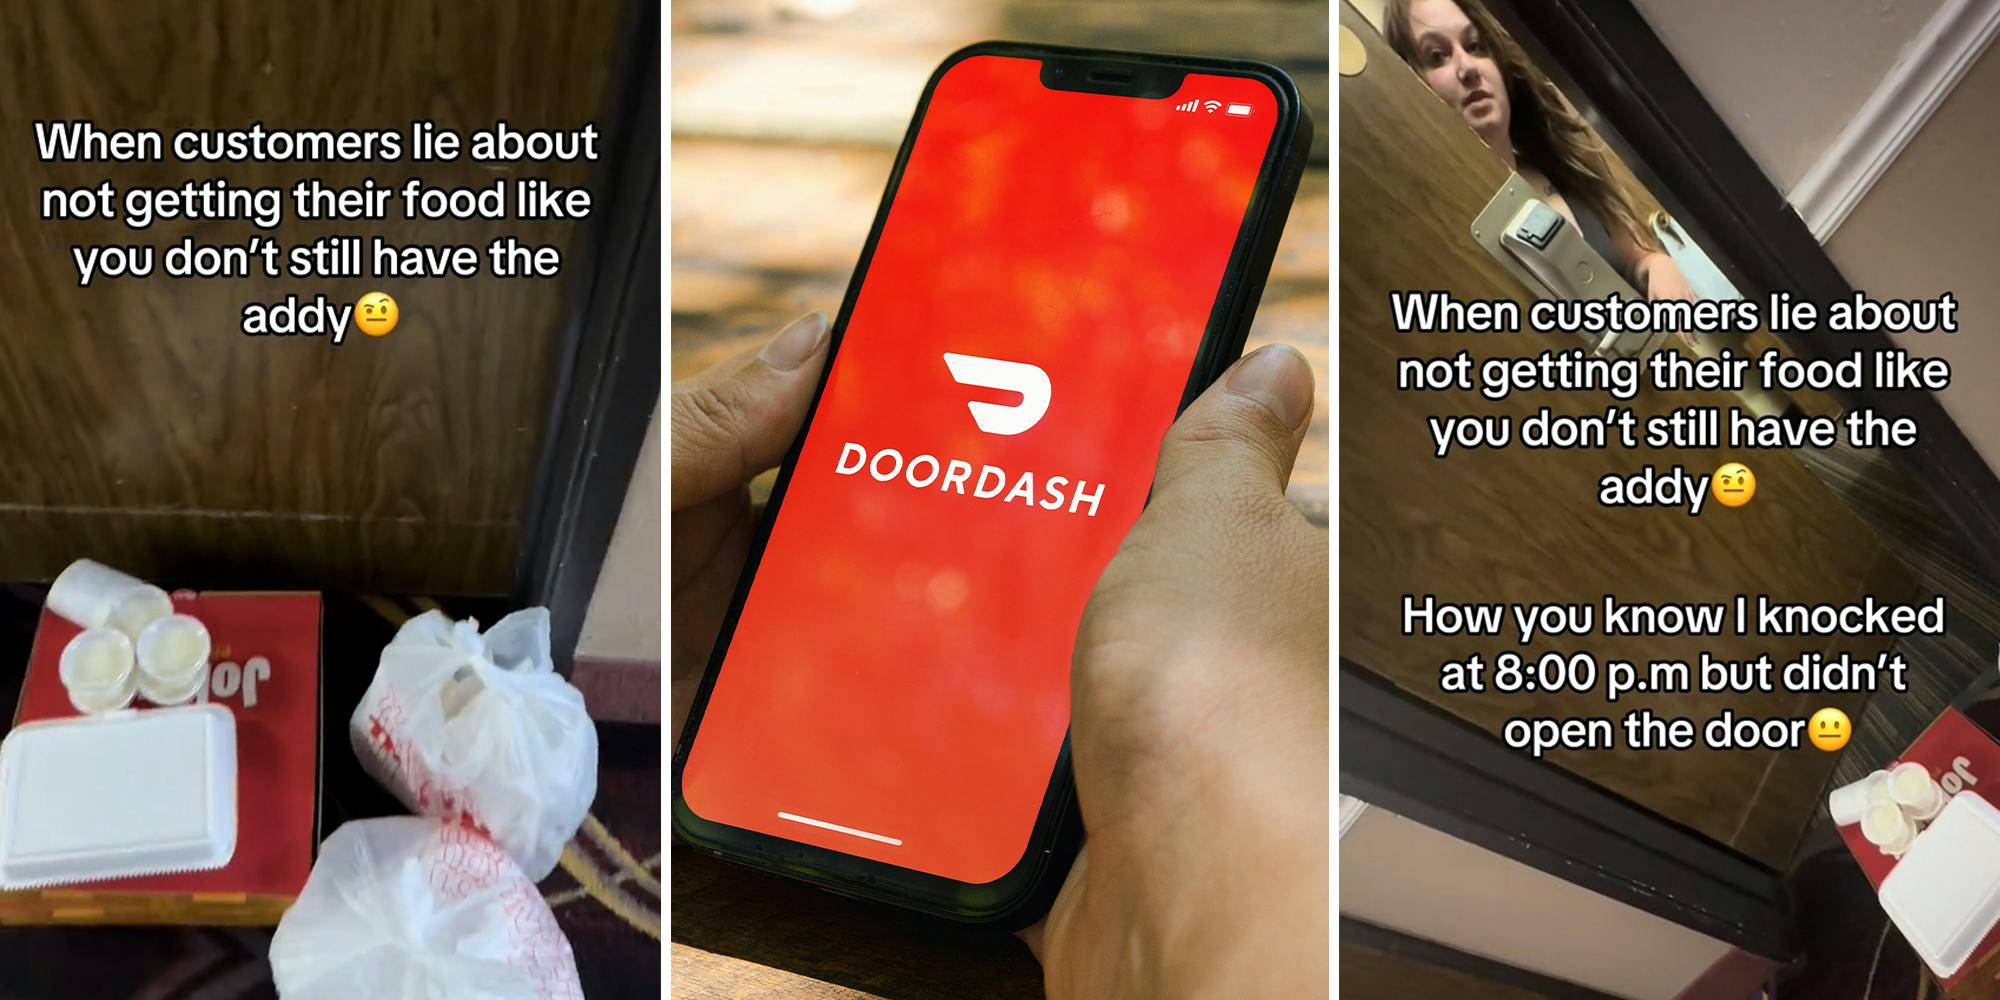 DoorDash driver confronts customer who ‘lied’ about not receiving order